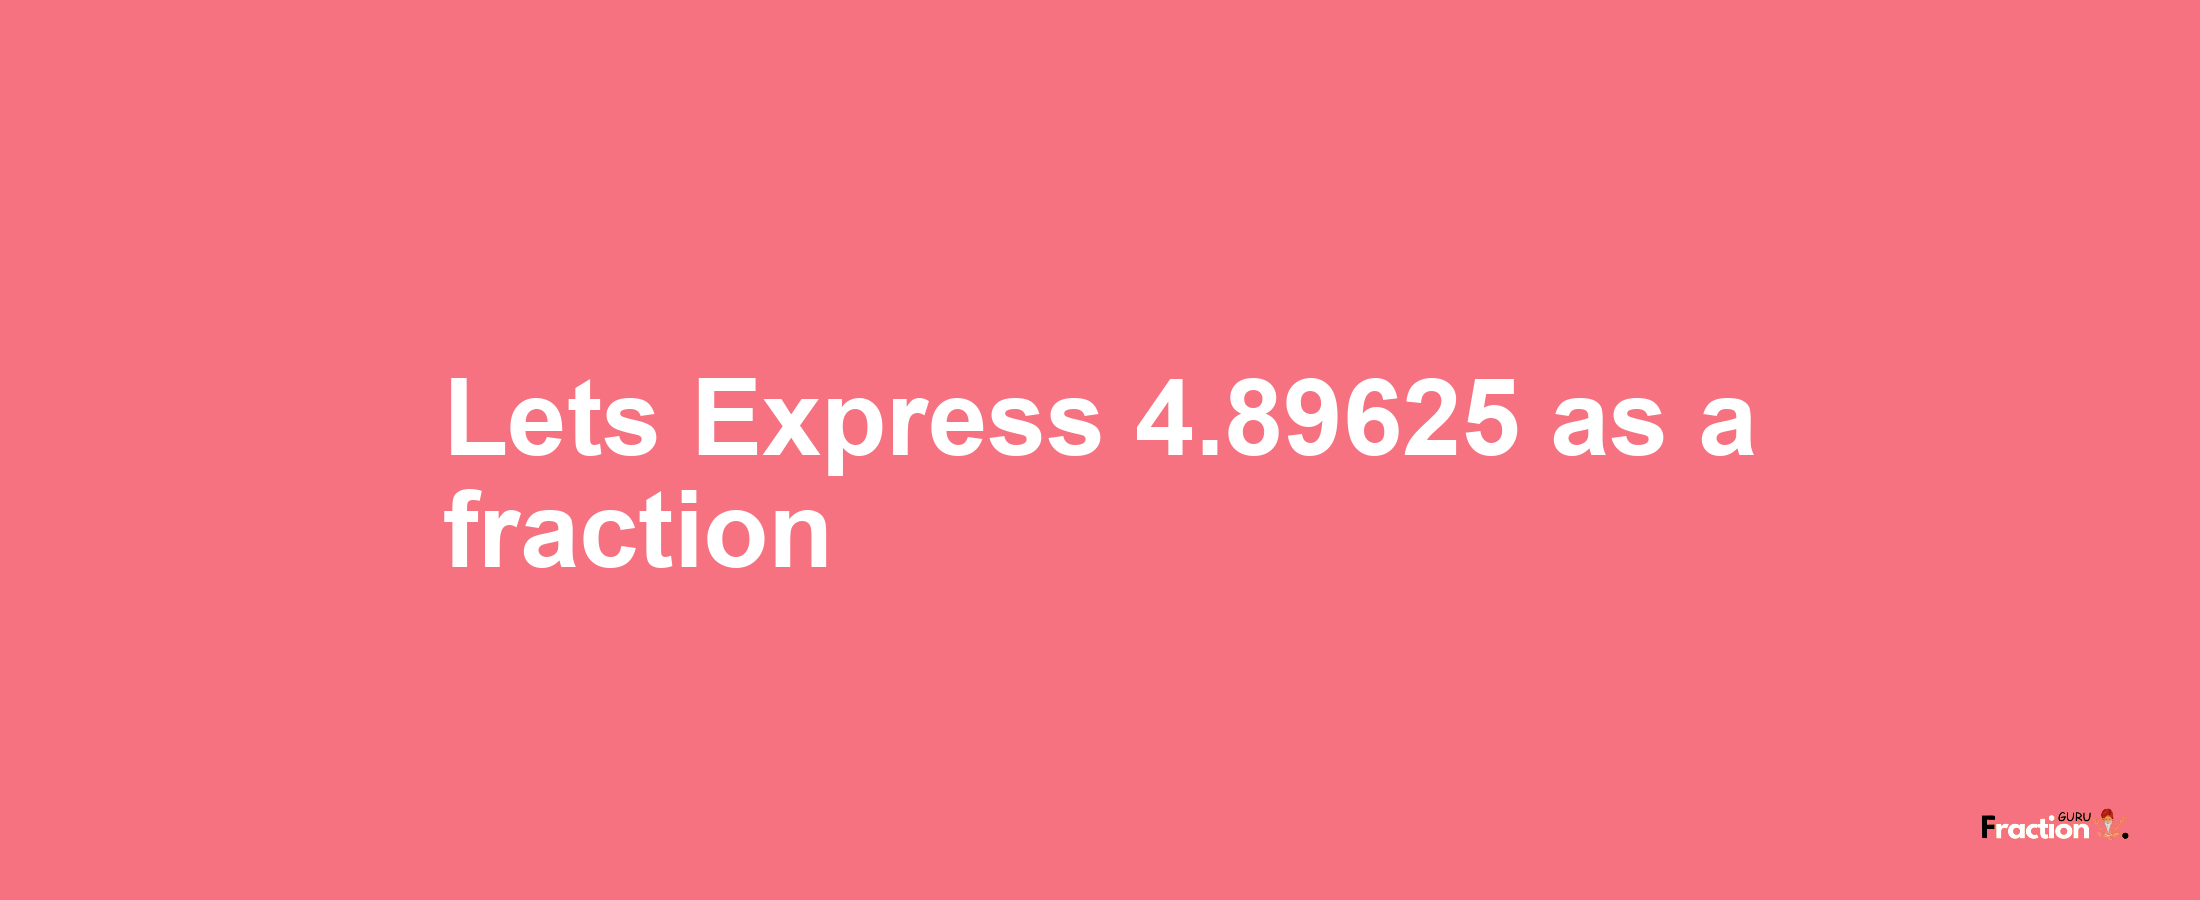 Lets Express 4.89625 as afraction